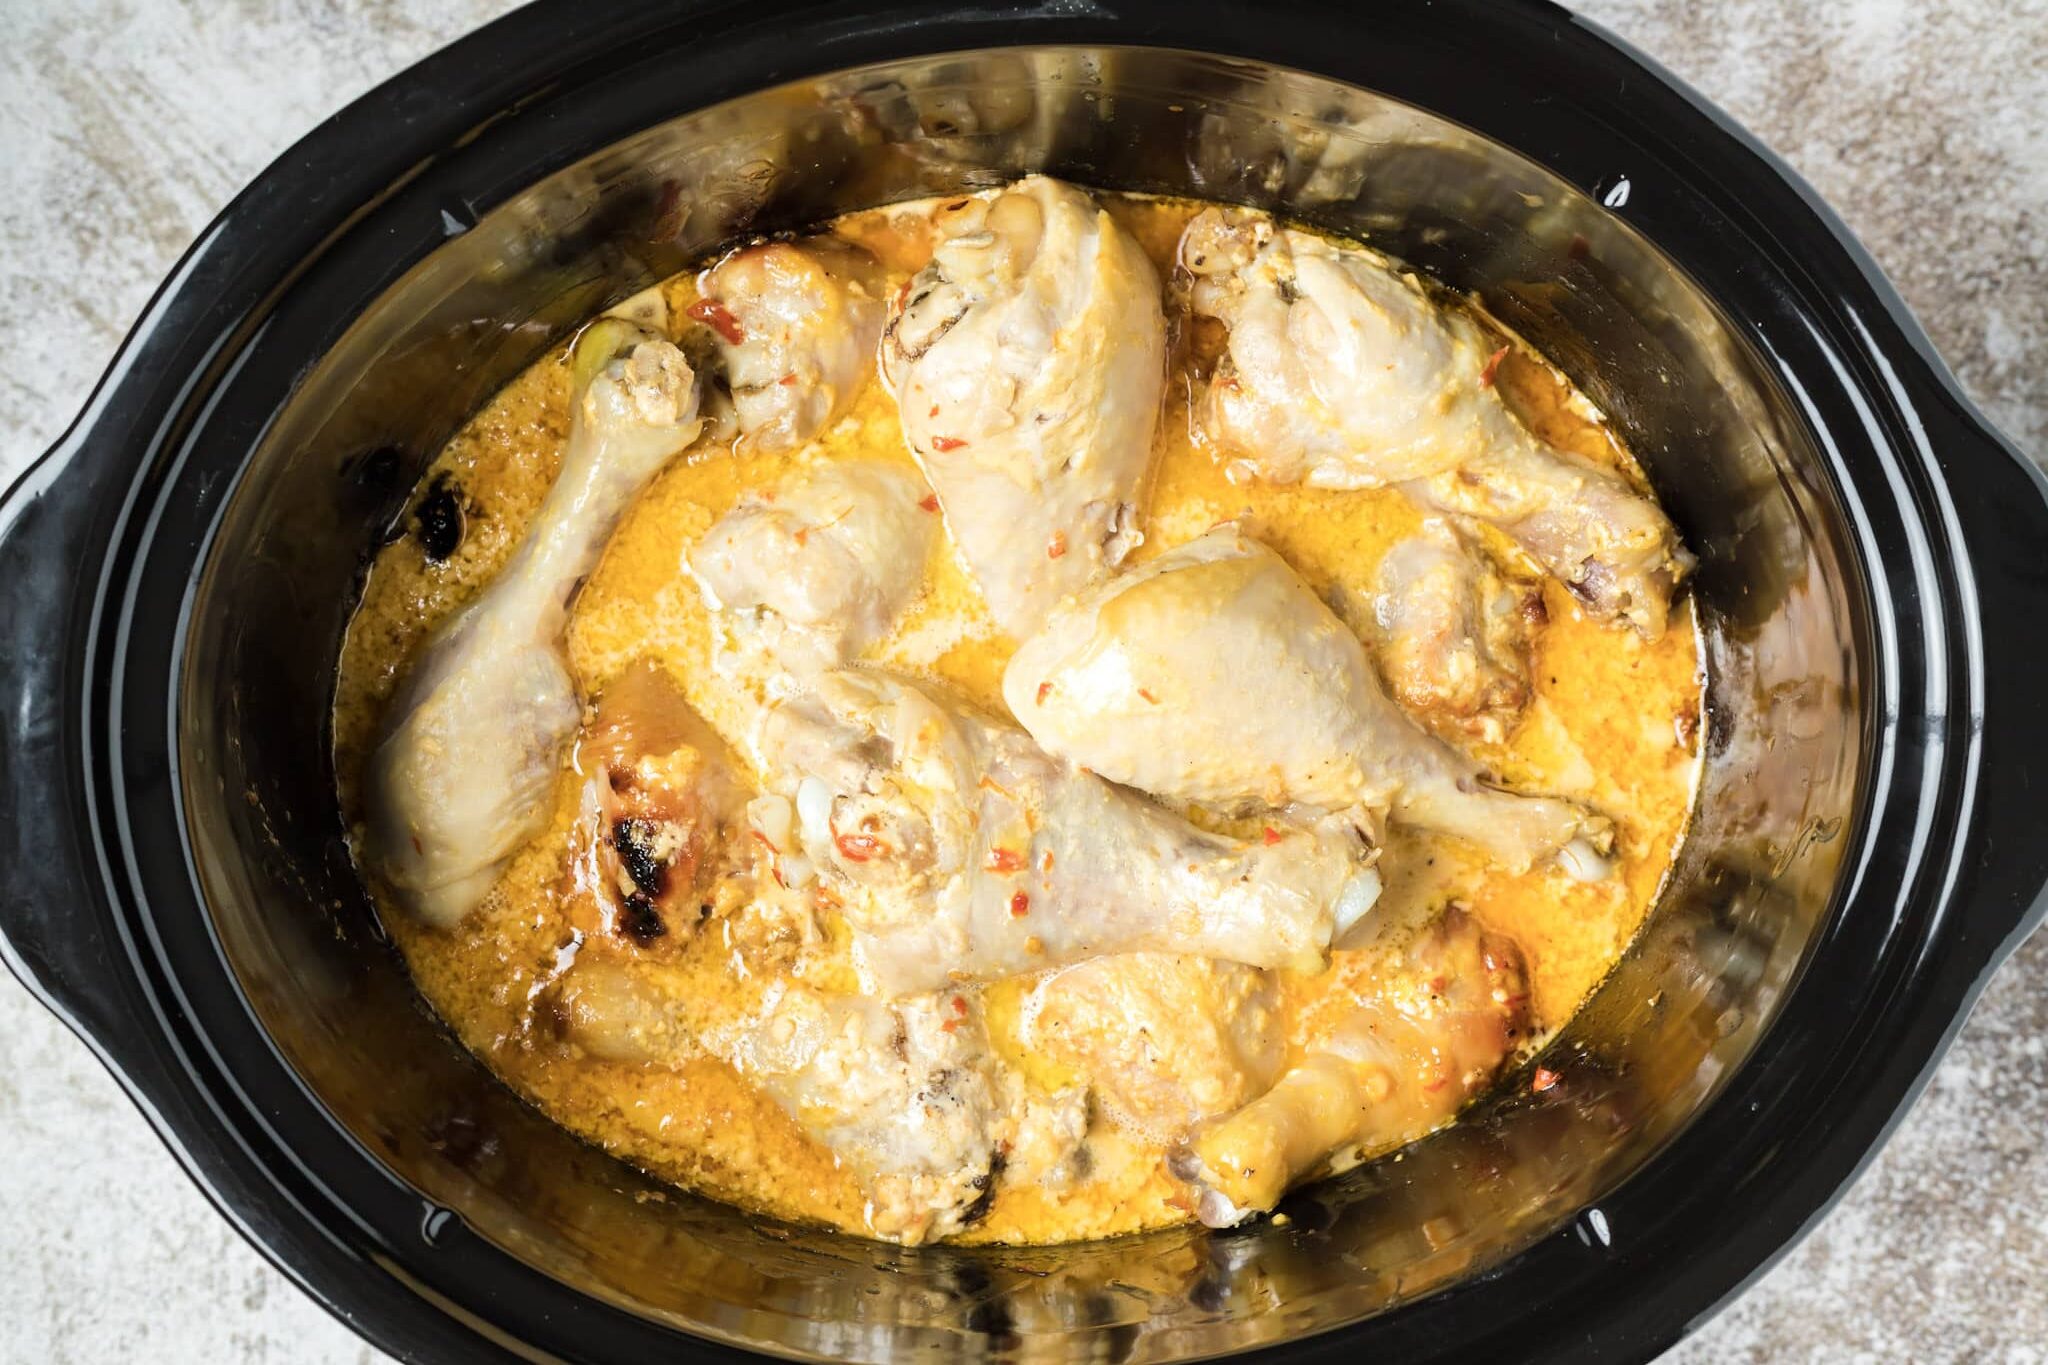 bang bang chicken with sauce, cooked in slow cooker